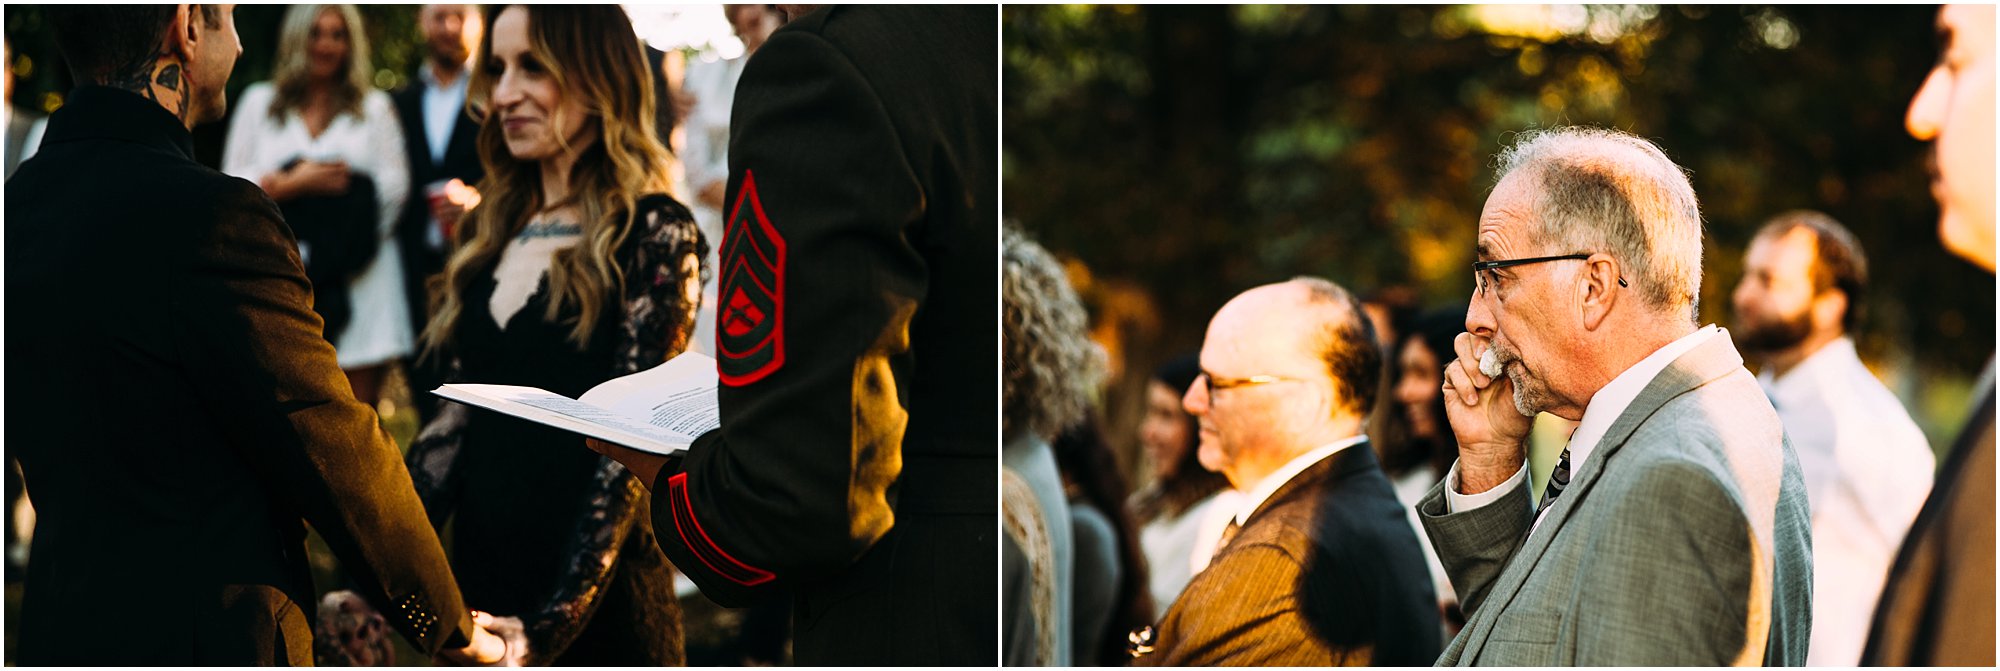 Father of the groom wiping tear away as he watches his son get married